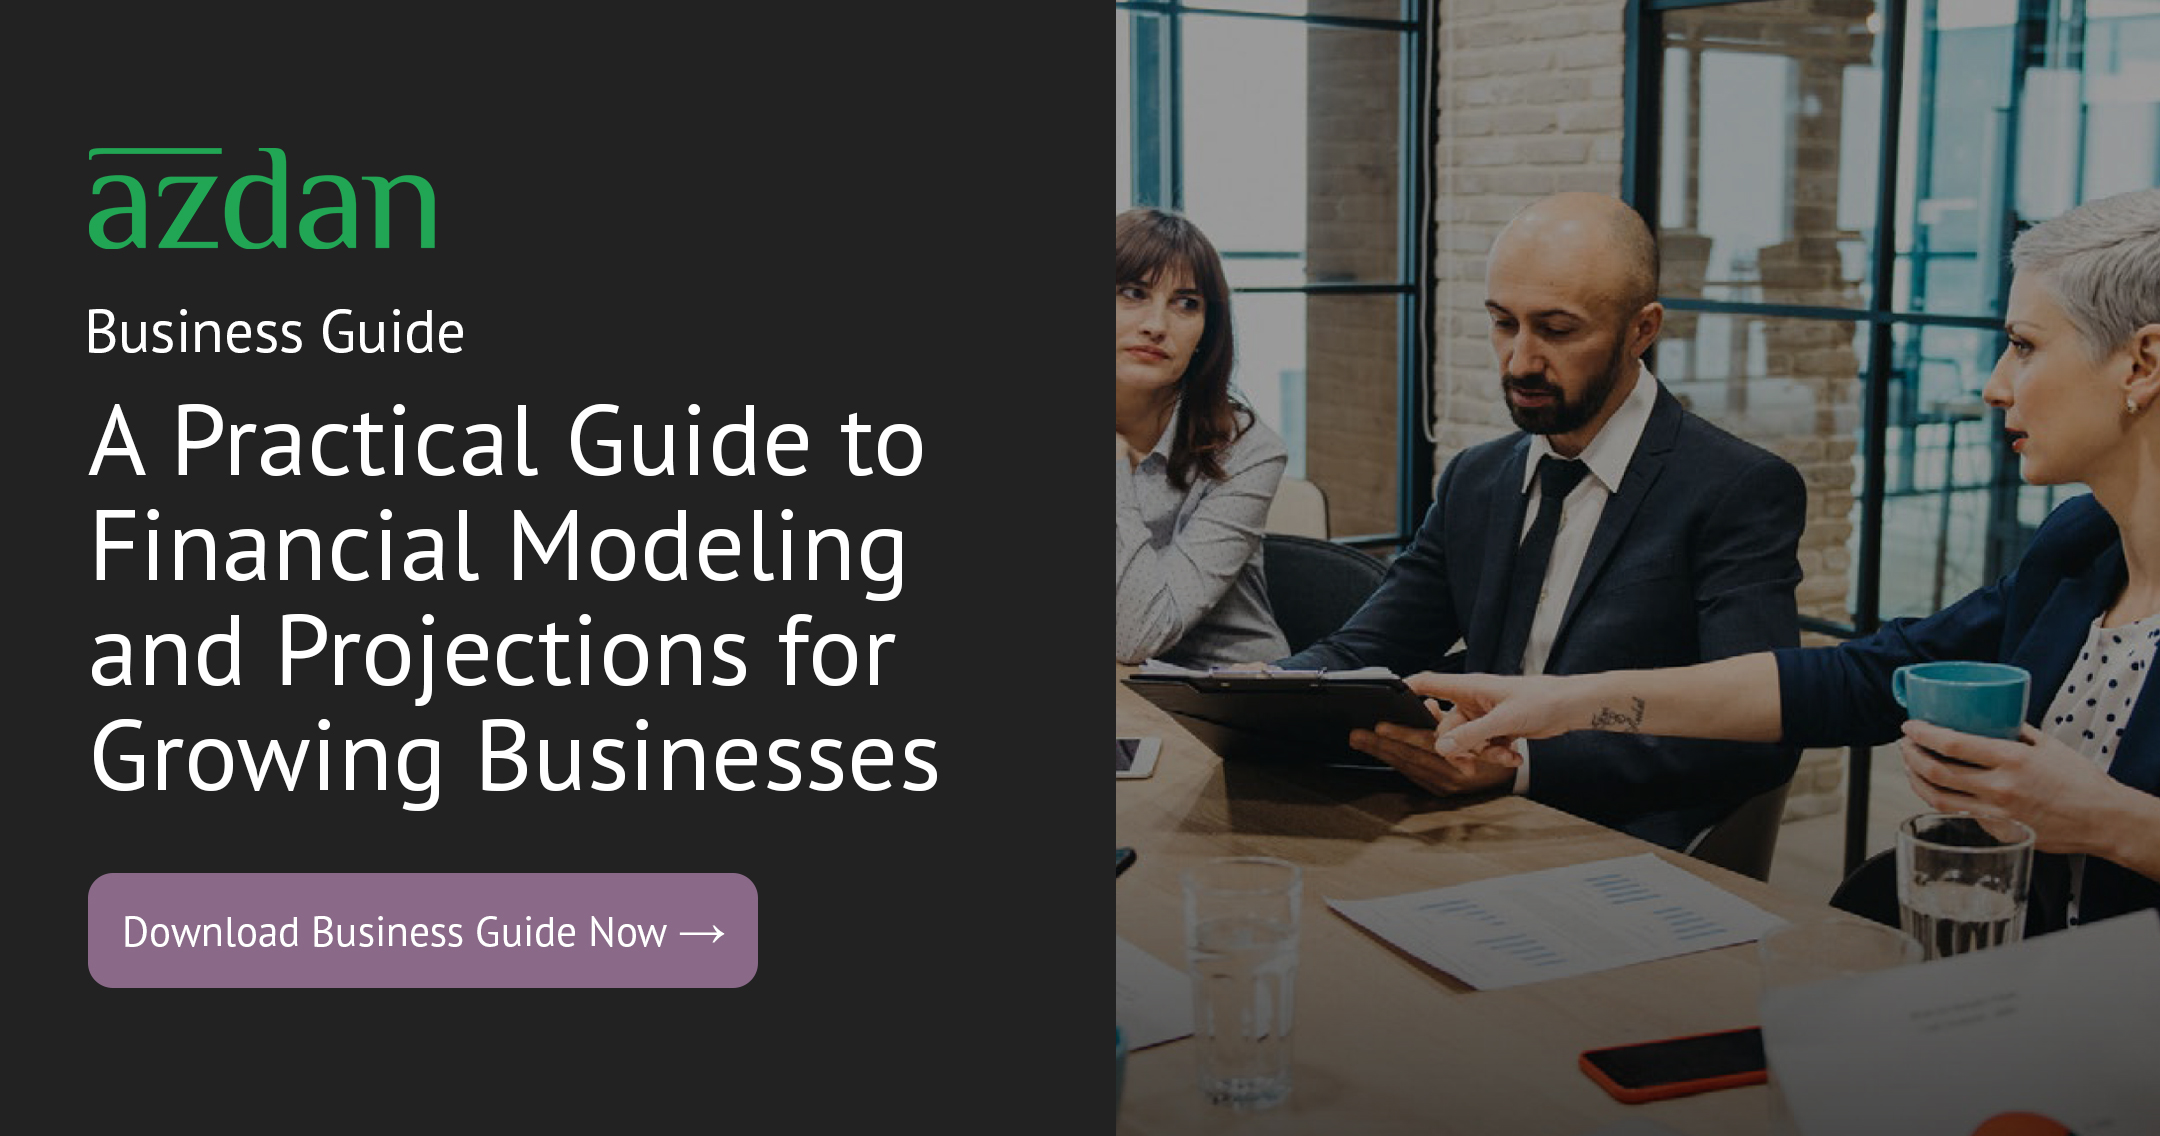 A Practical Guide to Financial Modeling and Projections